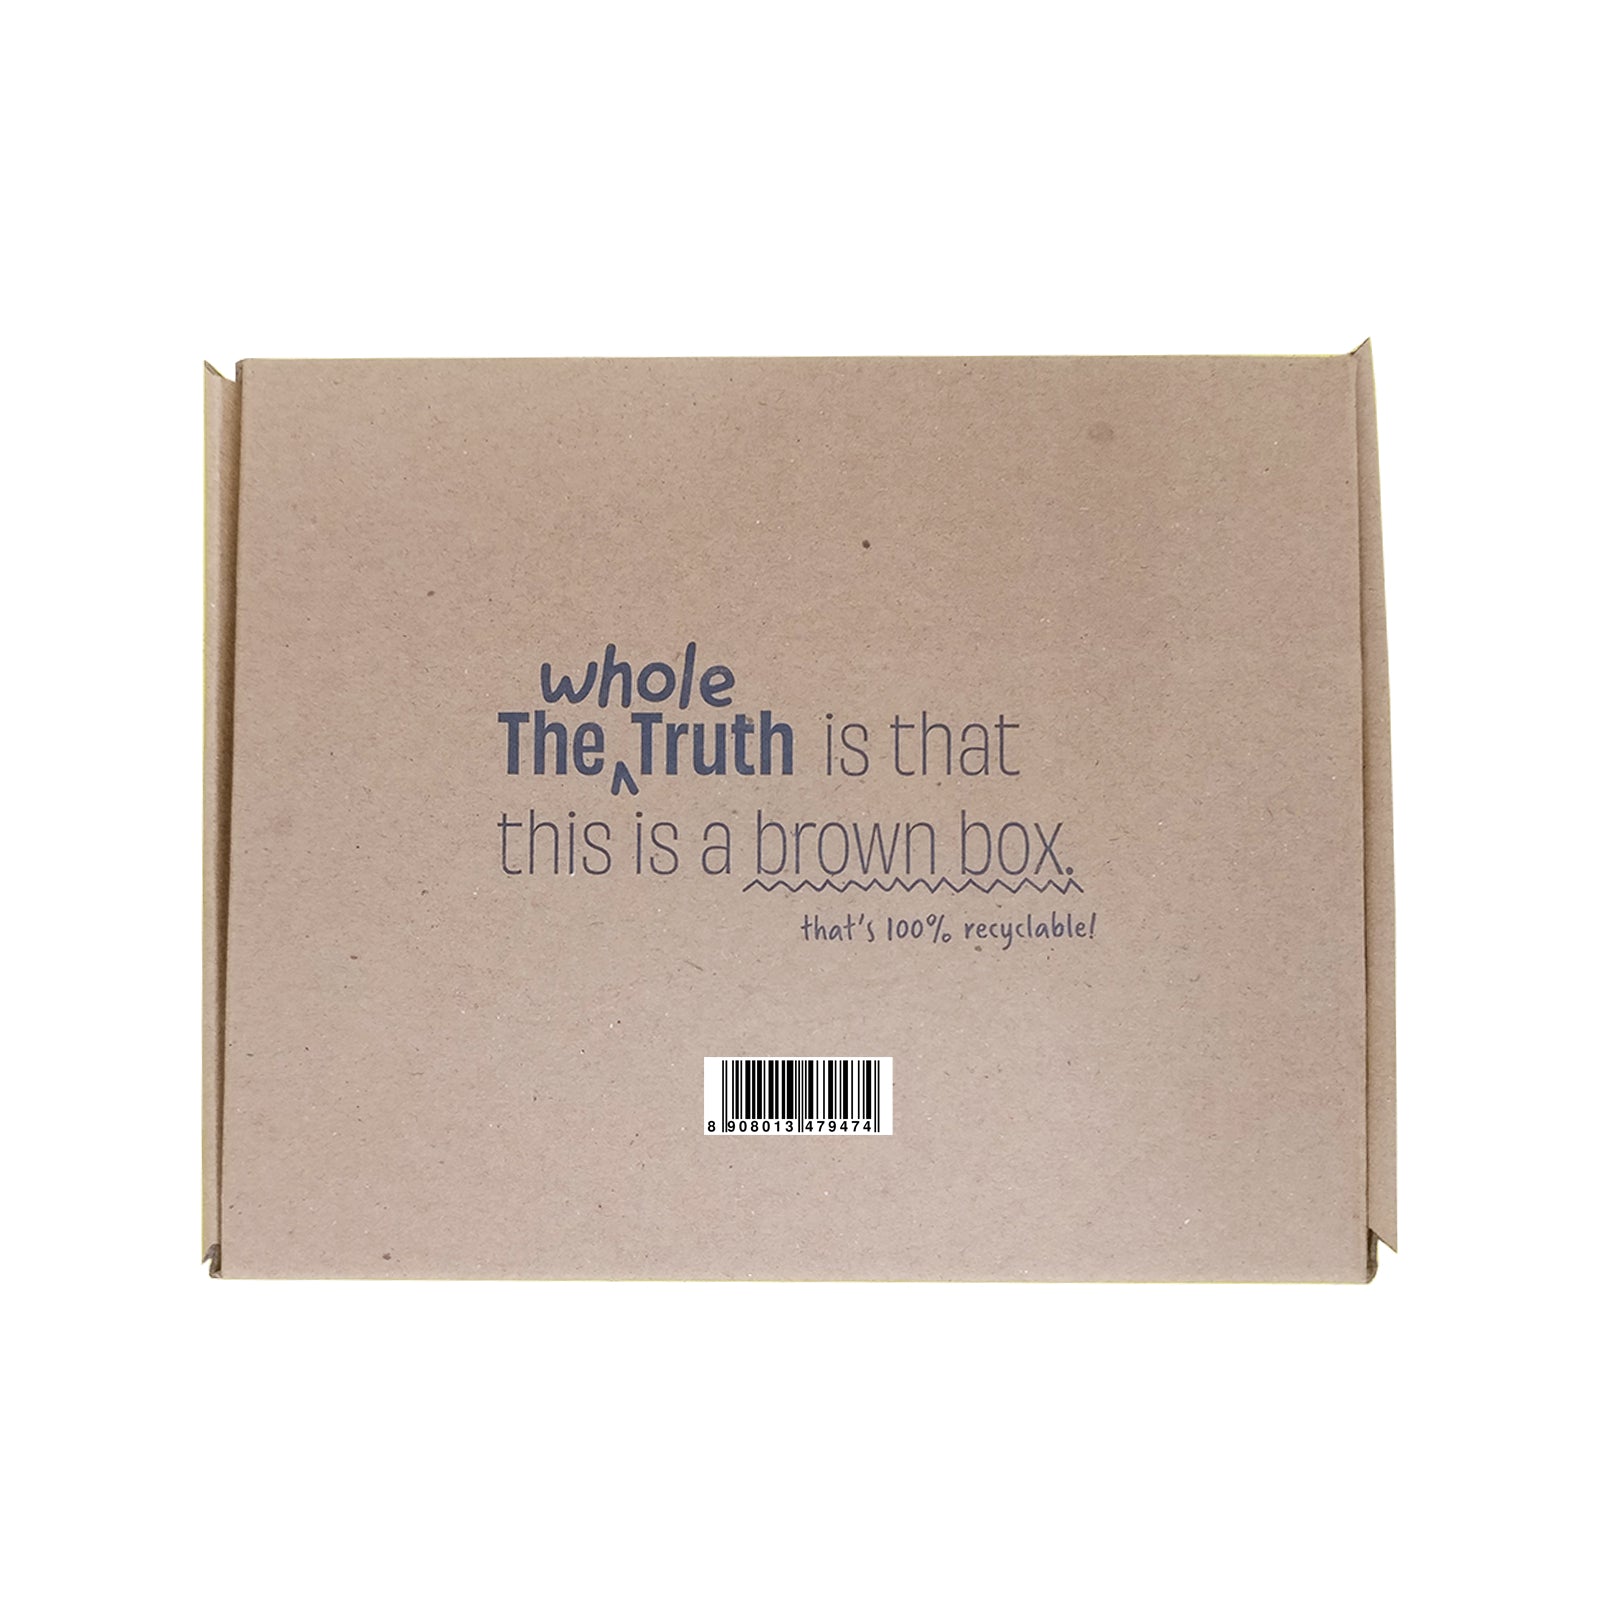 The Whole Truth - Mini Protein Bars - The Chocolate Party - Pack of 8-8 x 27g - No Added Sugar - All Natural